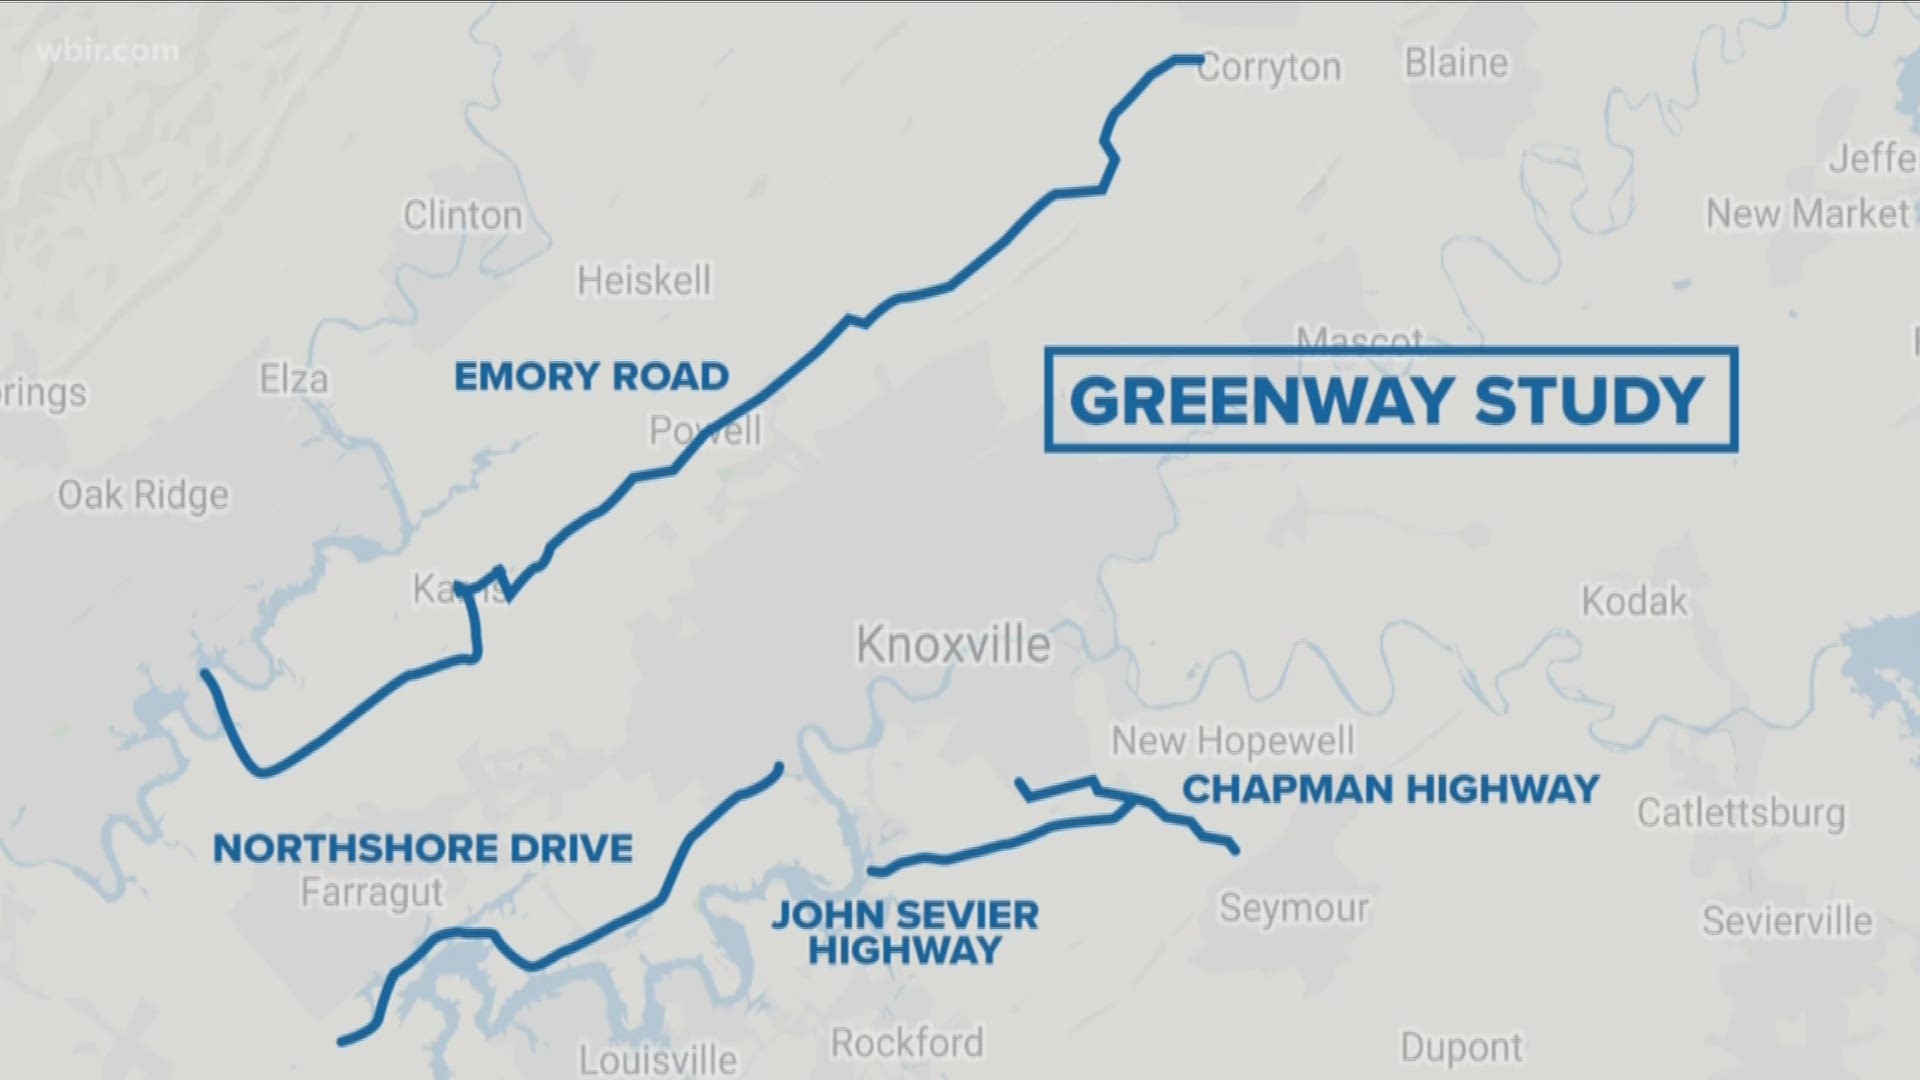 The county commission approved a study of four major corridors. Those include Northshore, Beaver Creek, Chapman Highway, and a portion of John Sevier Highway.